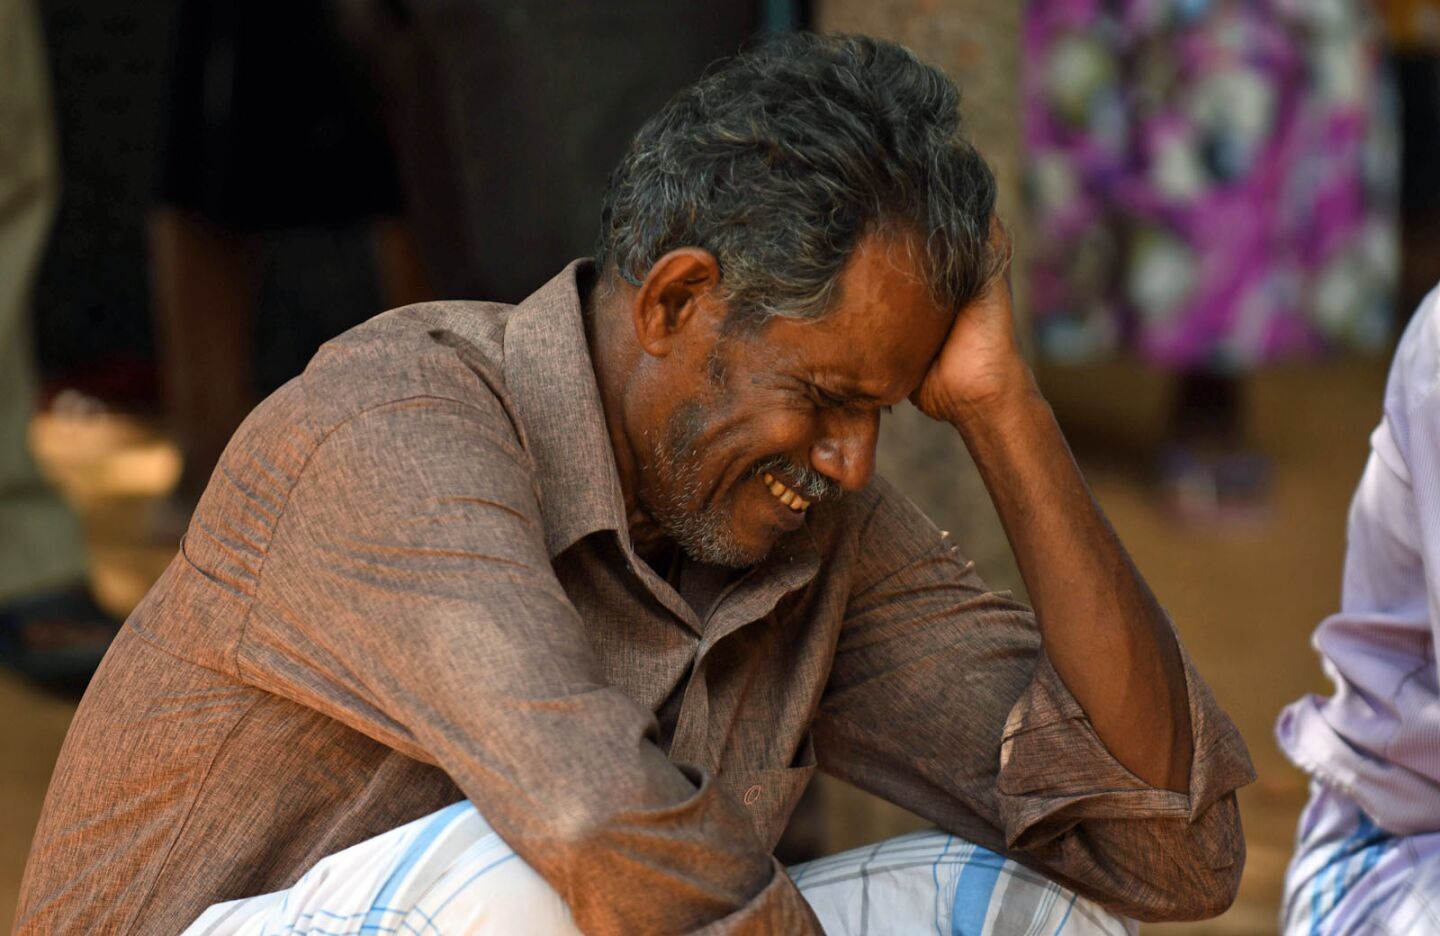 A victim's relative weeps outside a hospital in Batticaloa in eastern Sri Lanka after the Easter Sunday bombings.